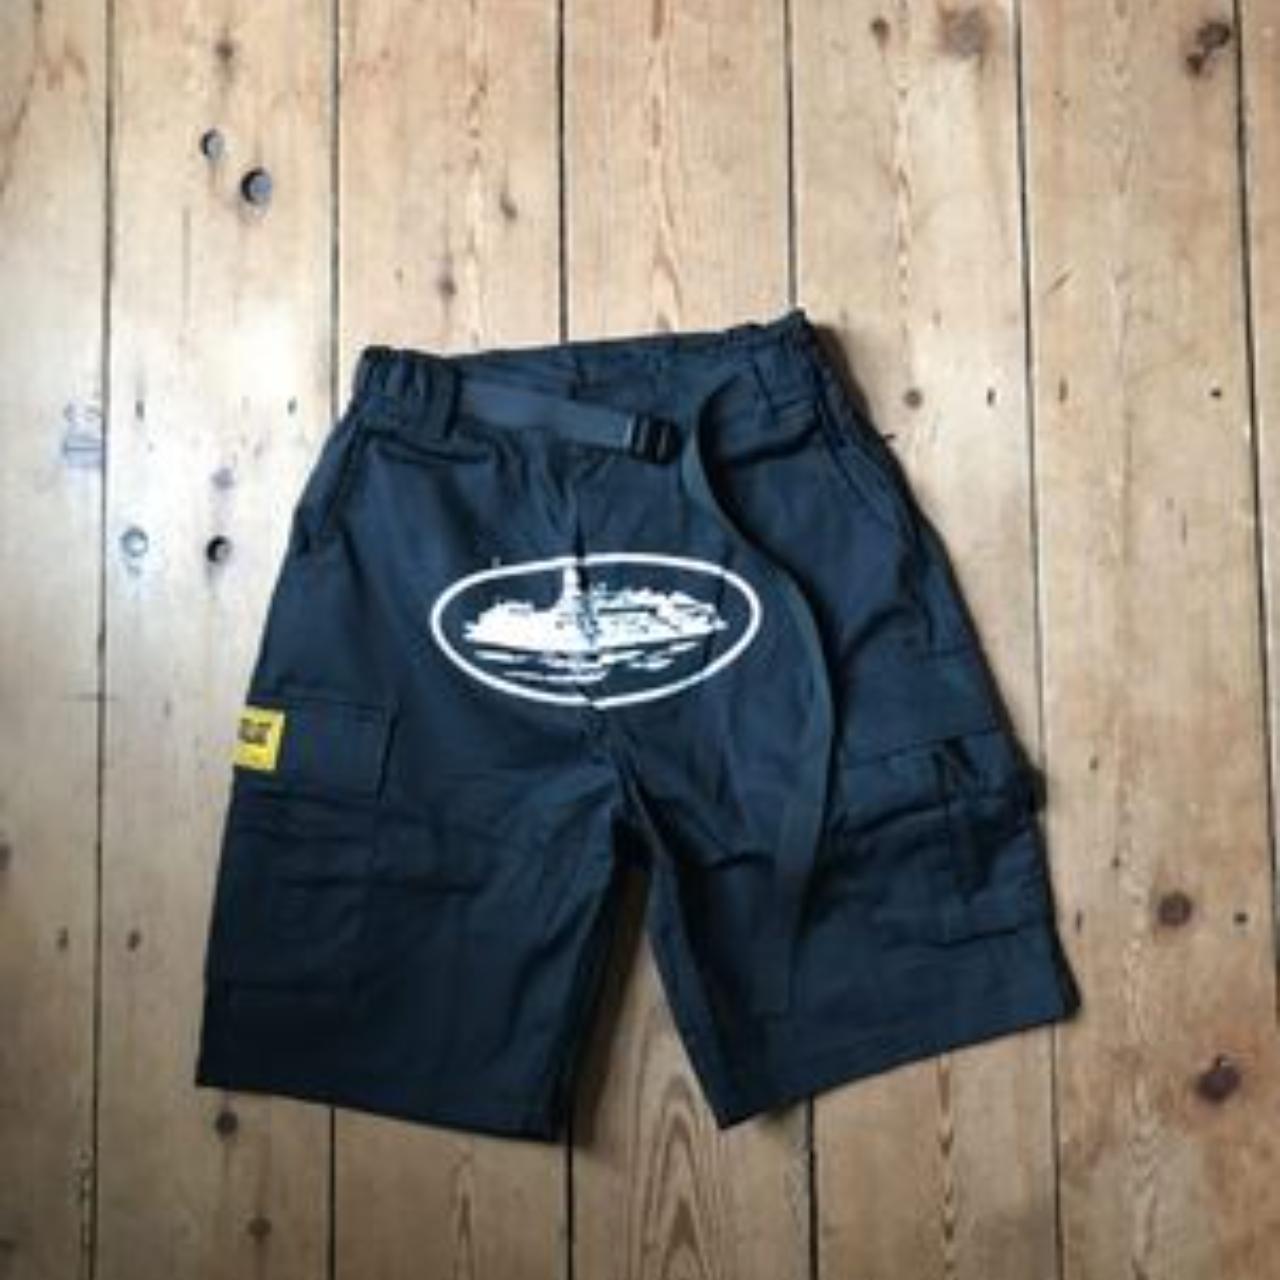 Corteiz cargo shorts Black and white Size small and... - Depop